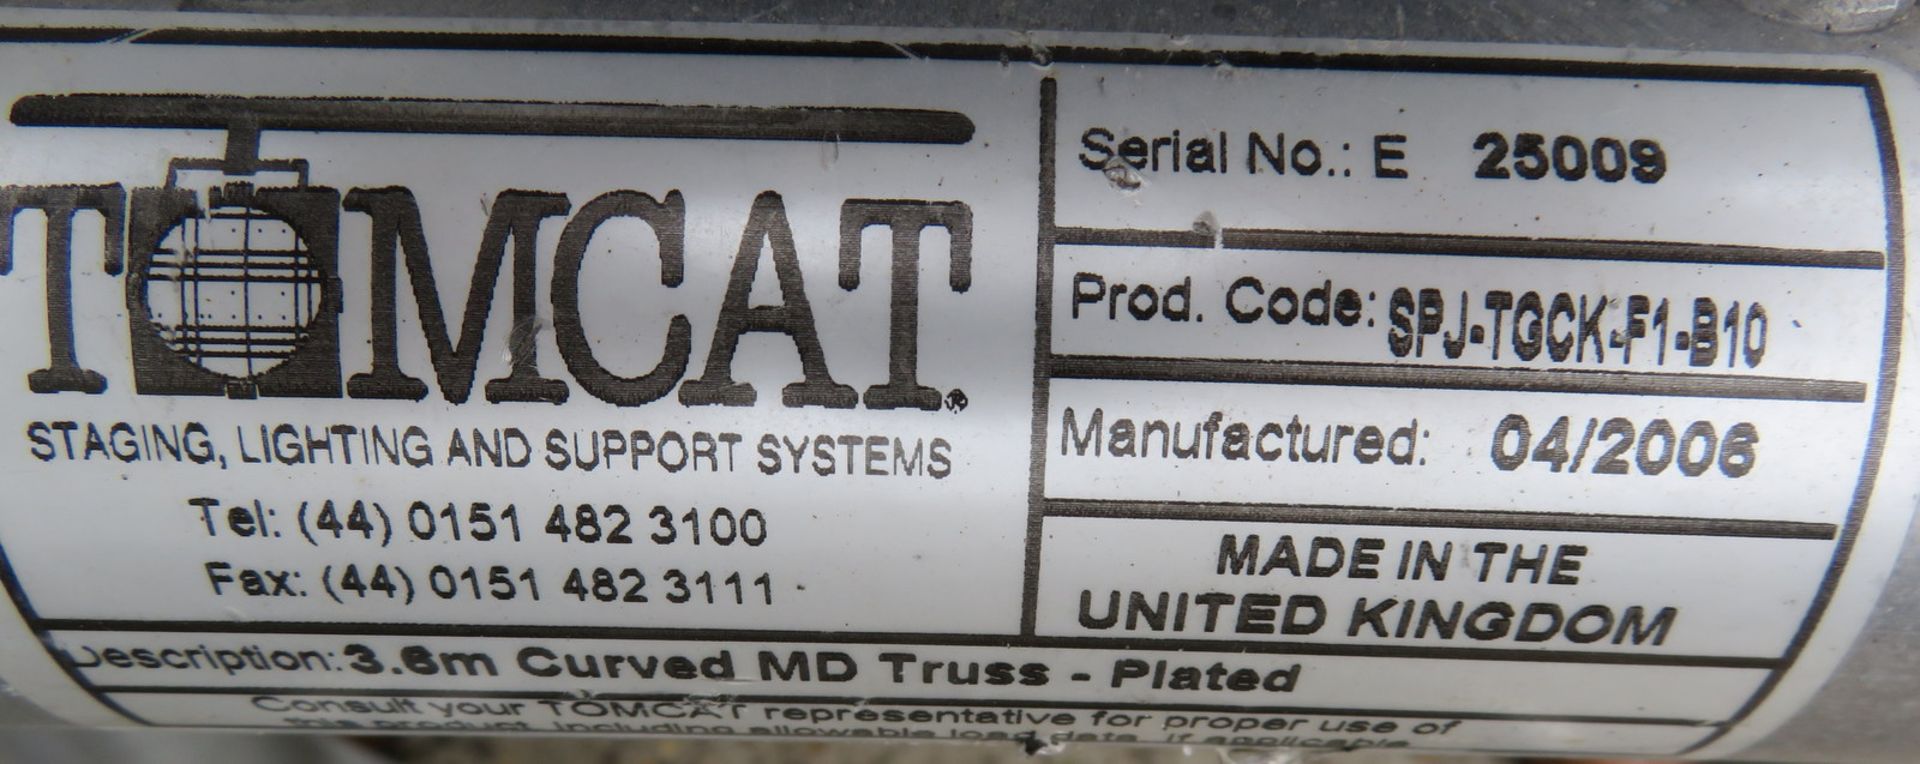 8x Tomcat 3.6m curved MD truss. Good condition - Image 7 of 7